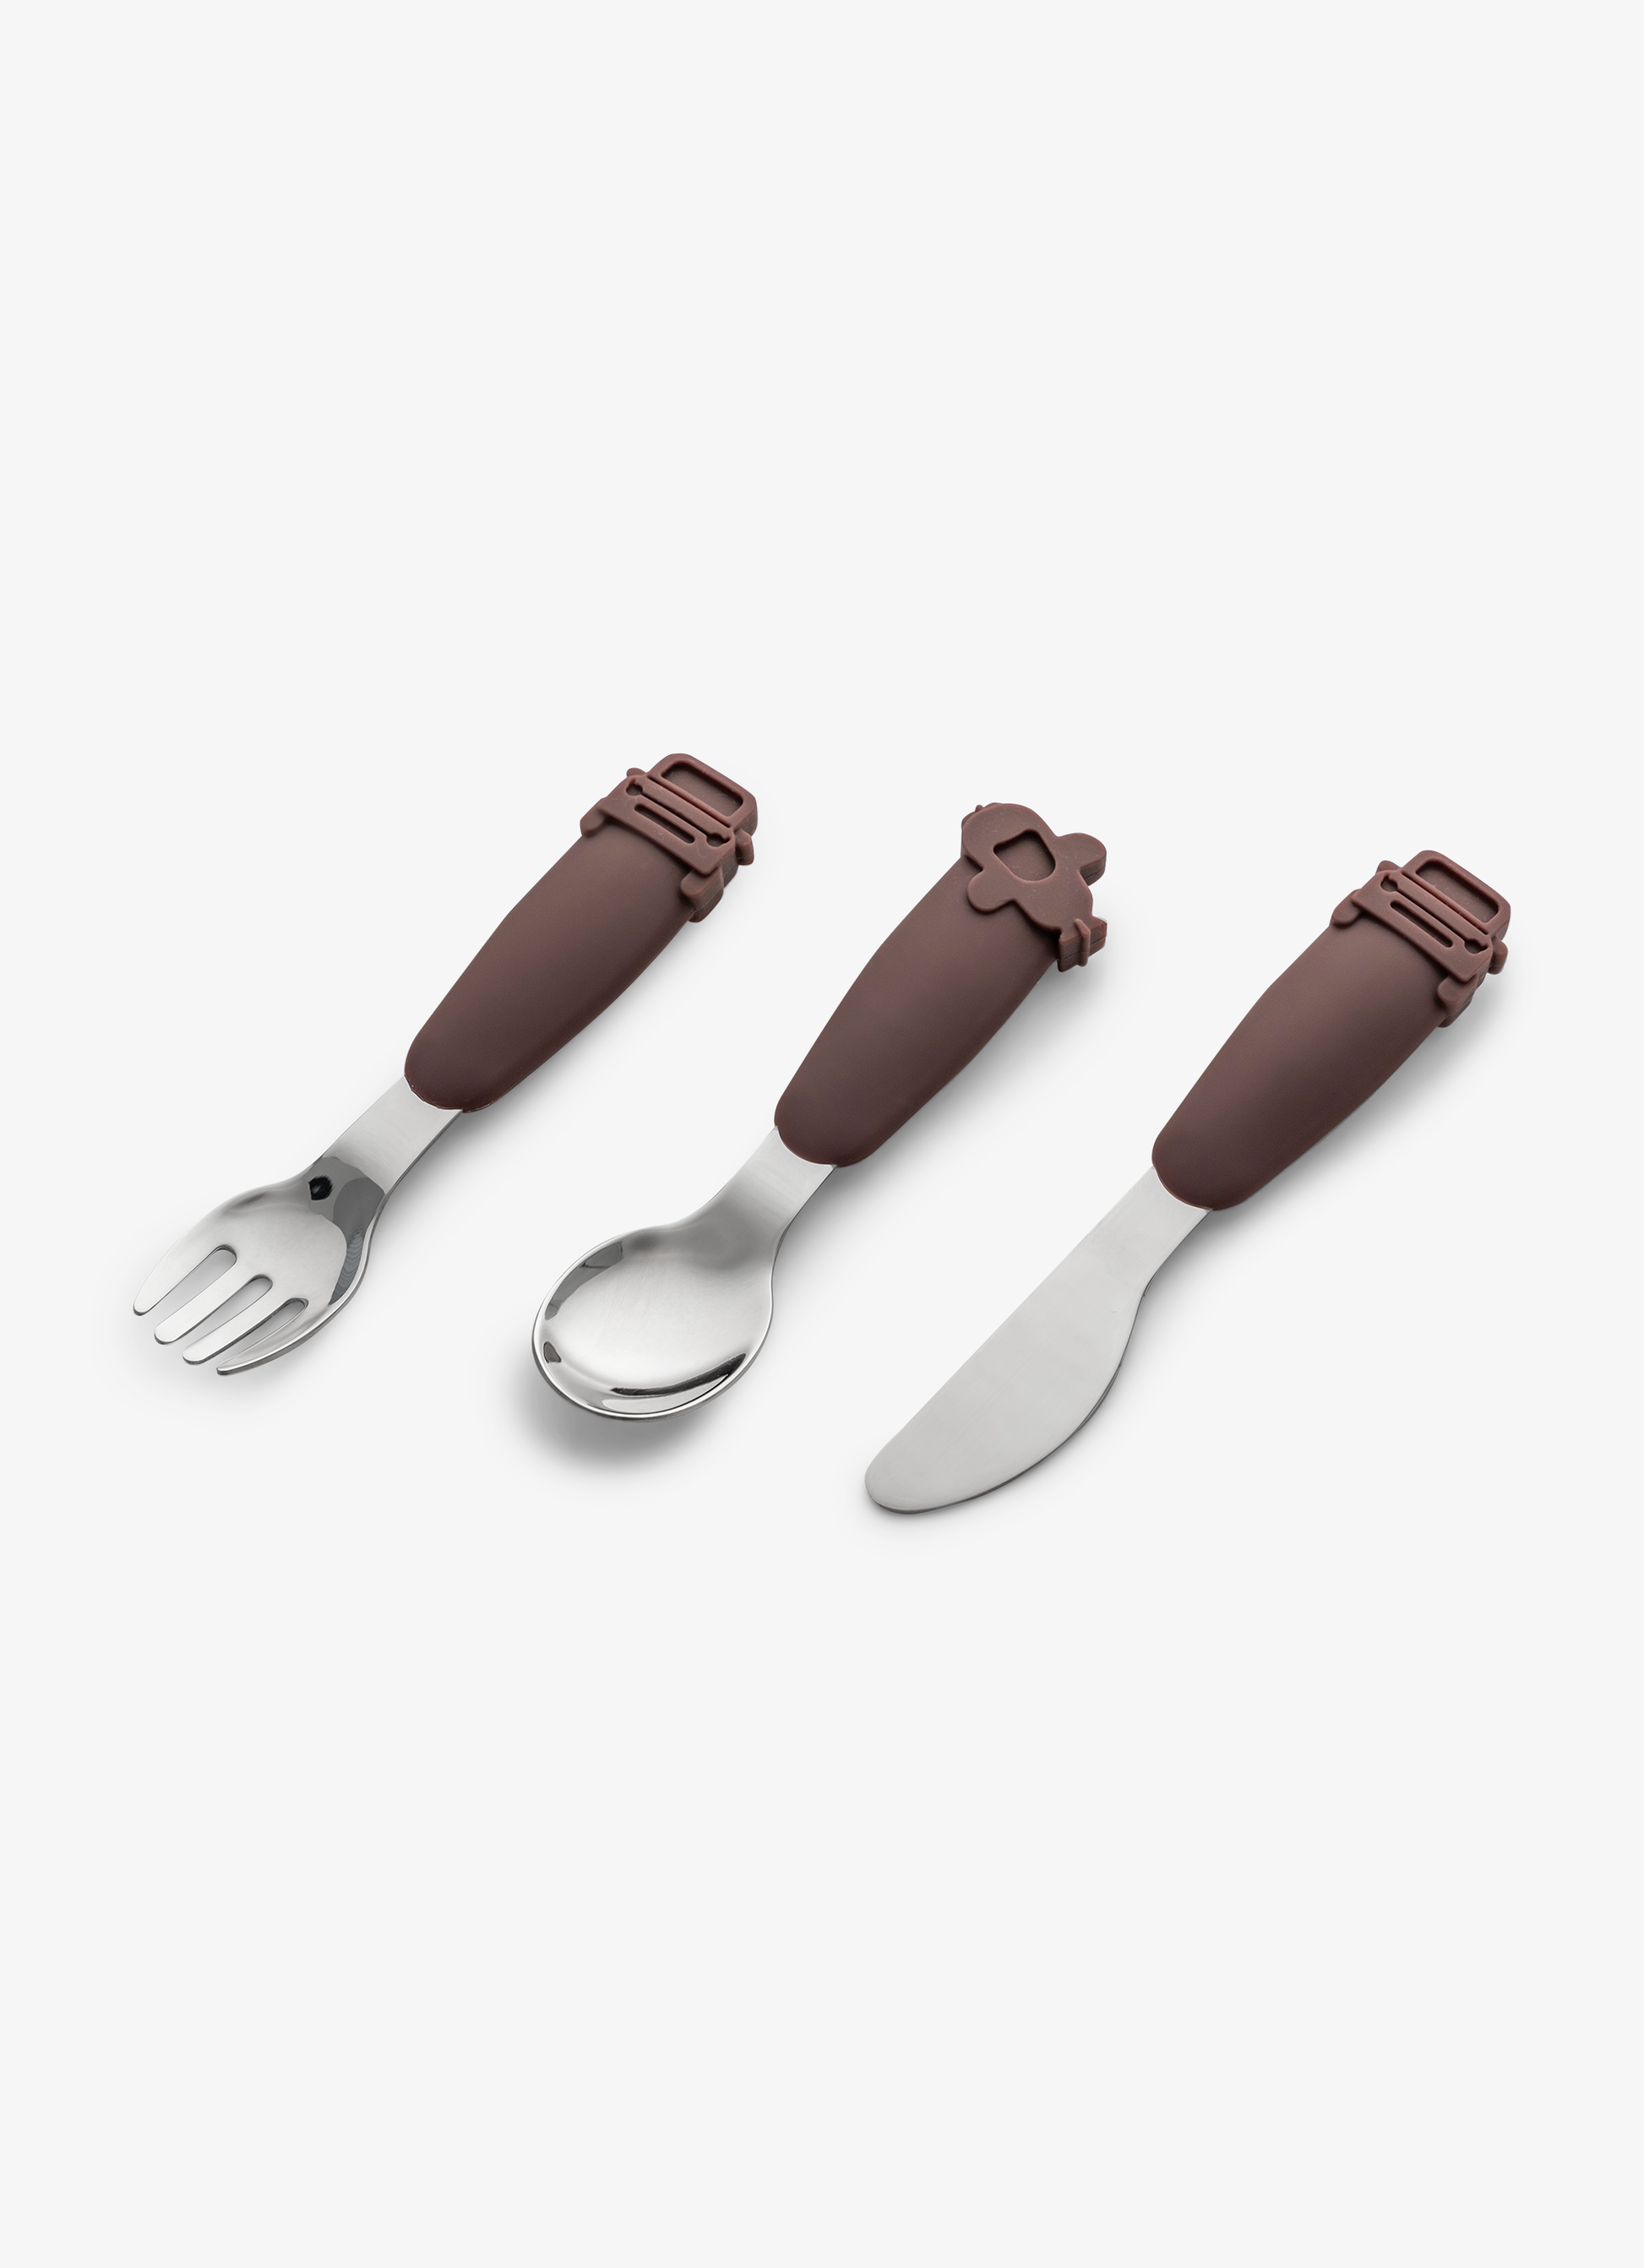 Citron Silicone Cutlery Set with Pouch - Plum - Laadlee